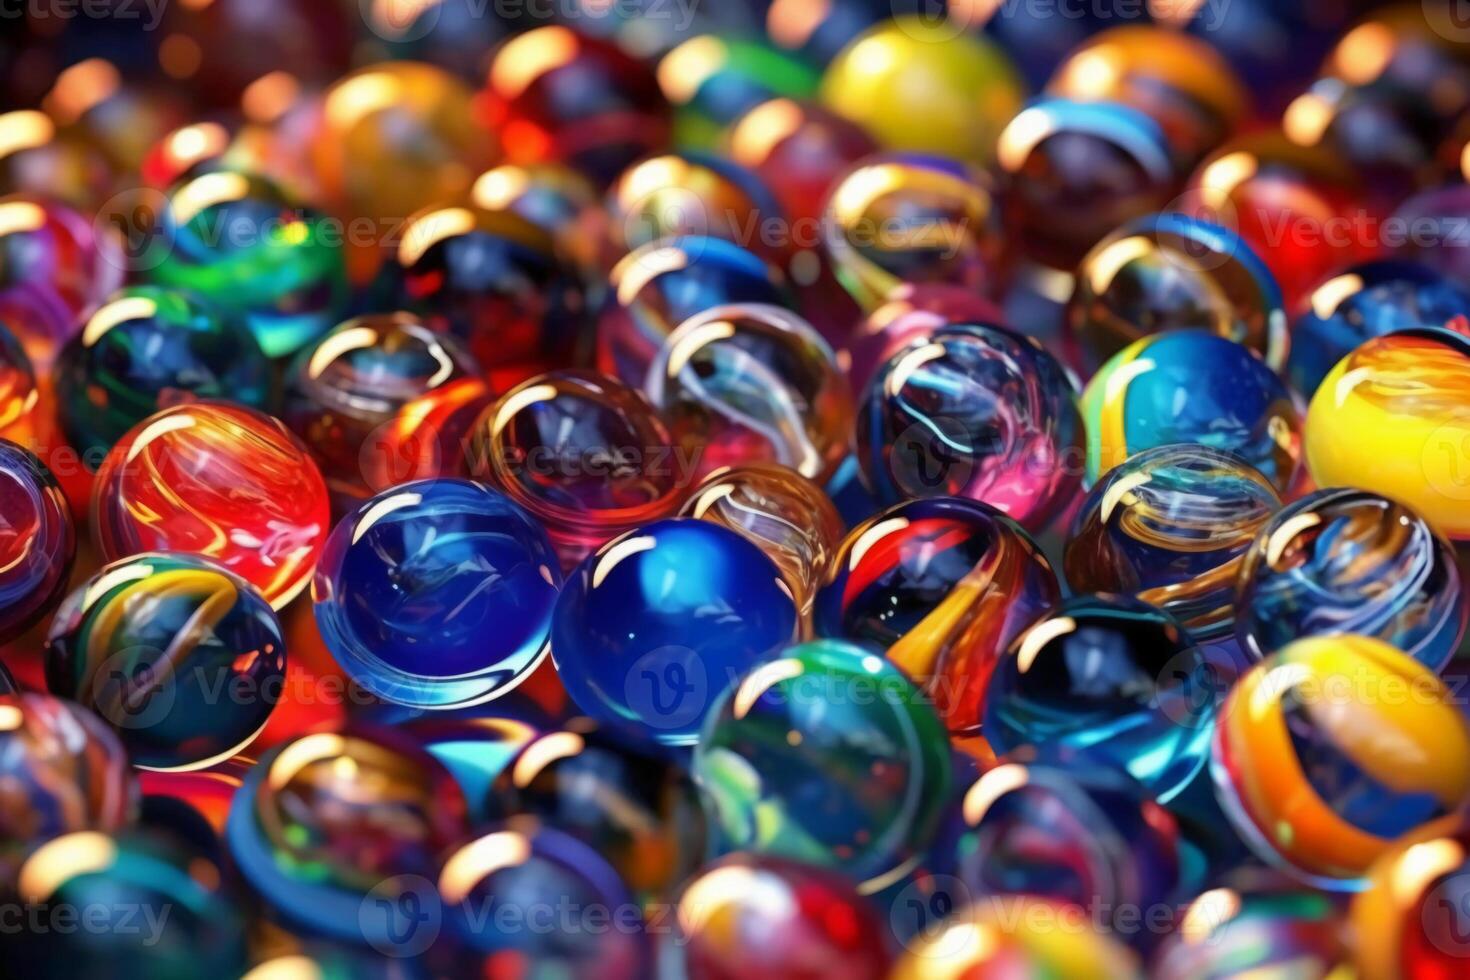 Shiny colorful glass marbles. photo